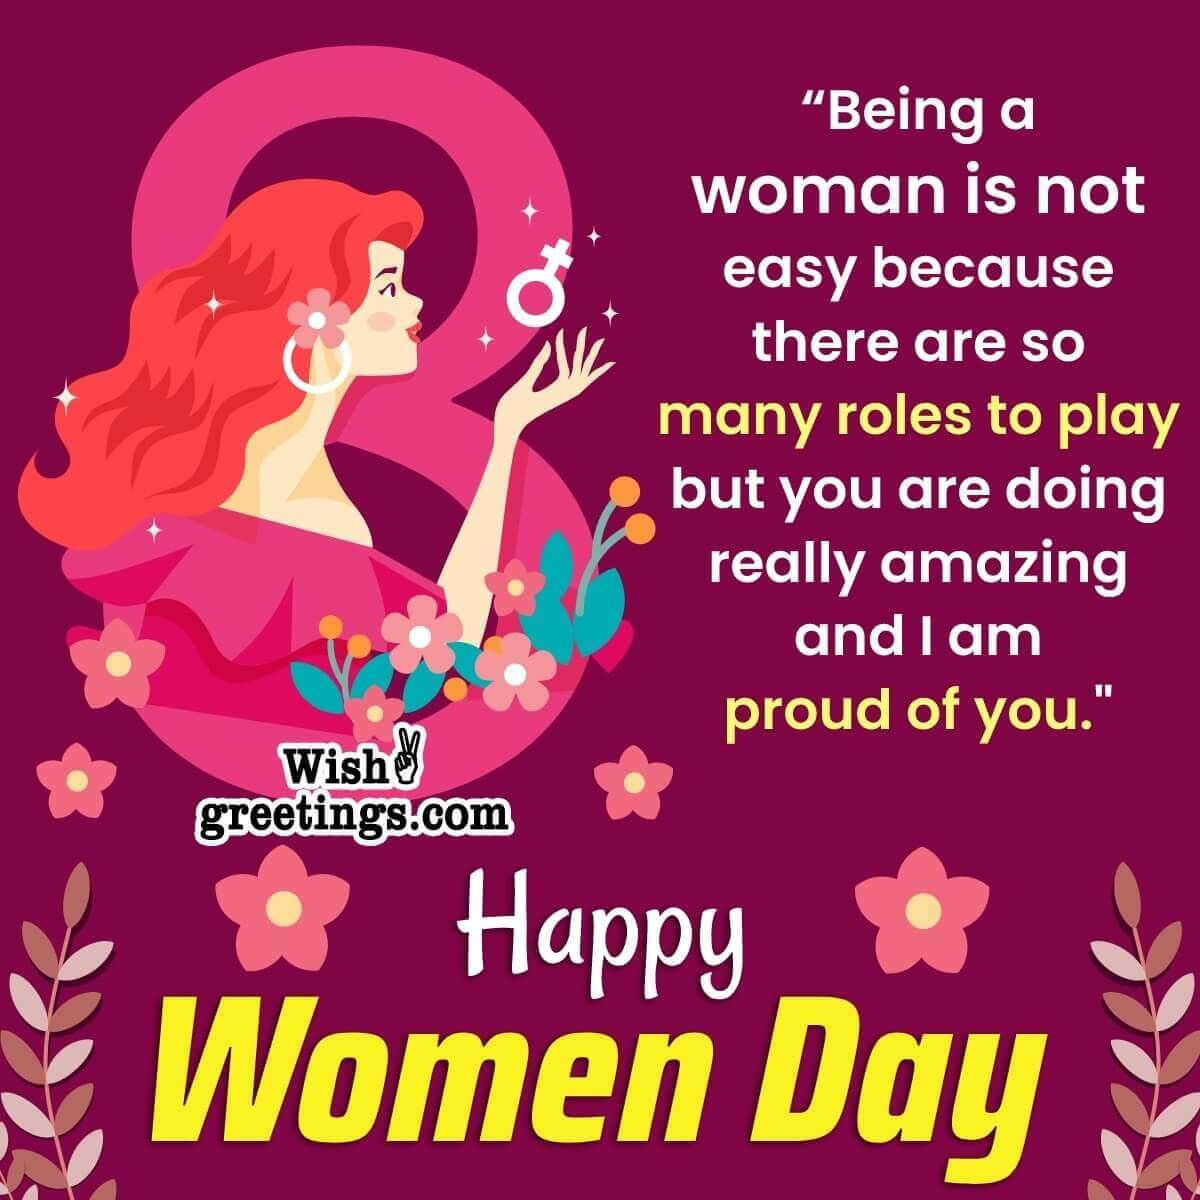 Happy International Women’s Day Message Pic